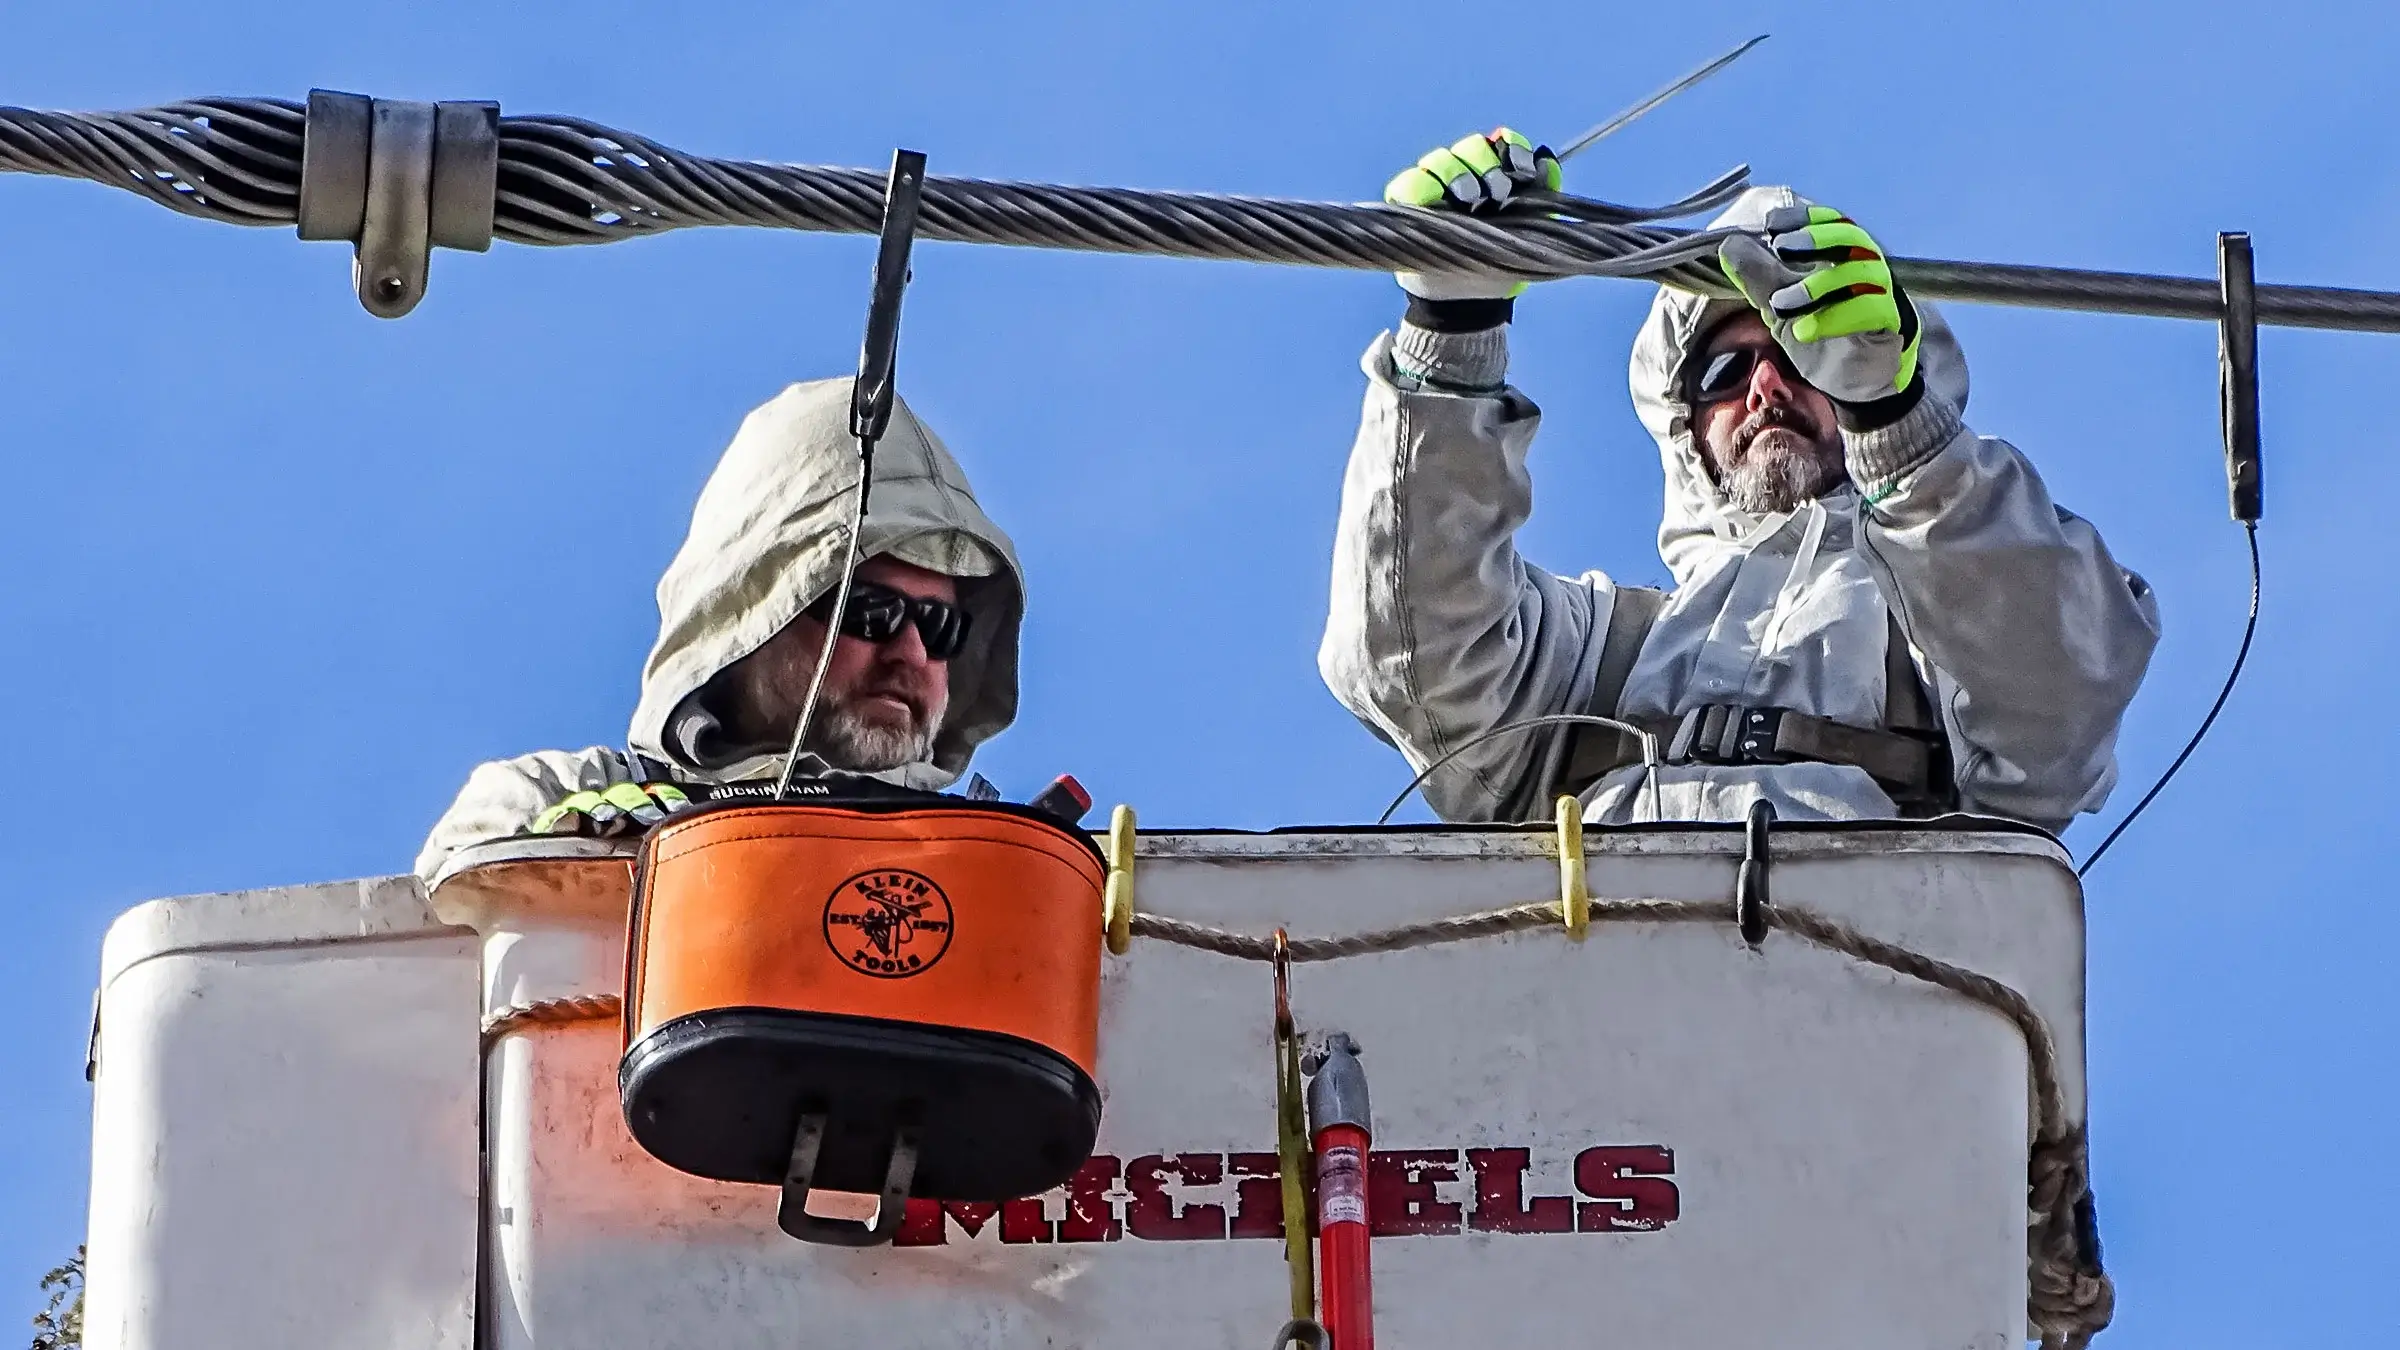 Two Michels linemen work on a power line from a bucket truck.